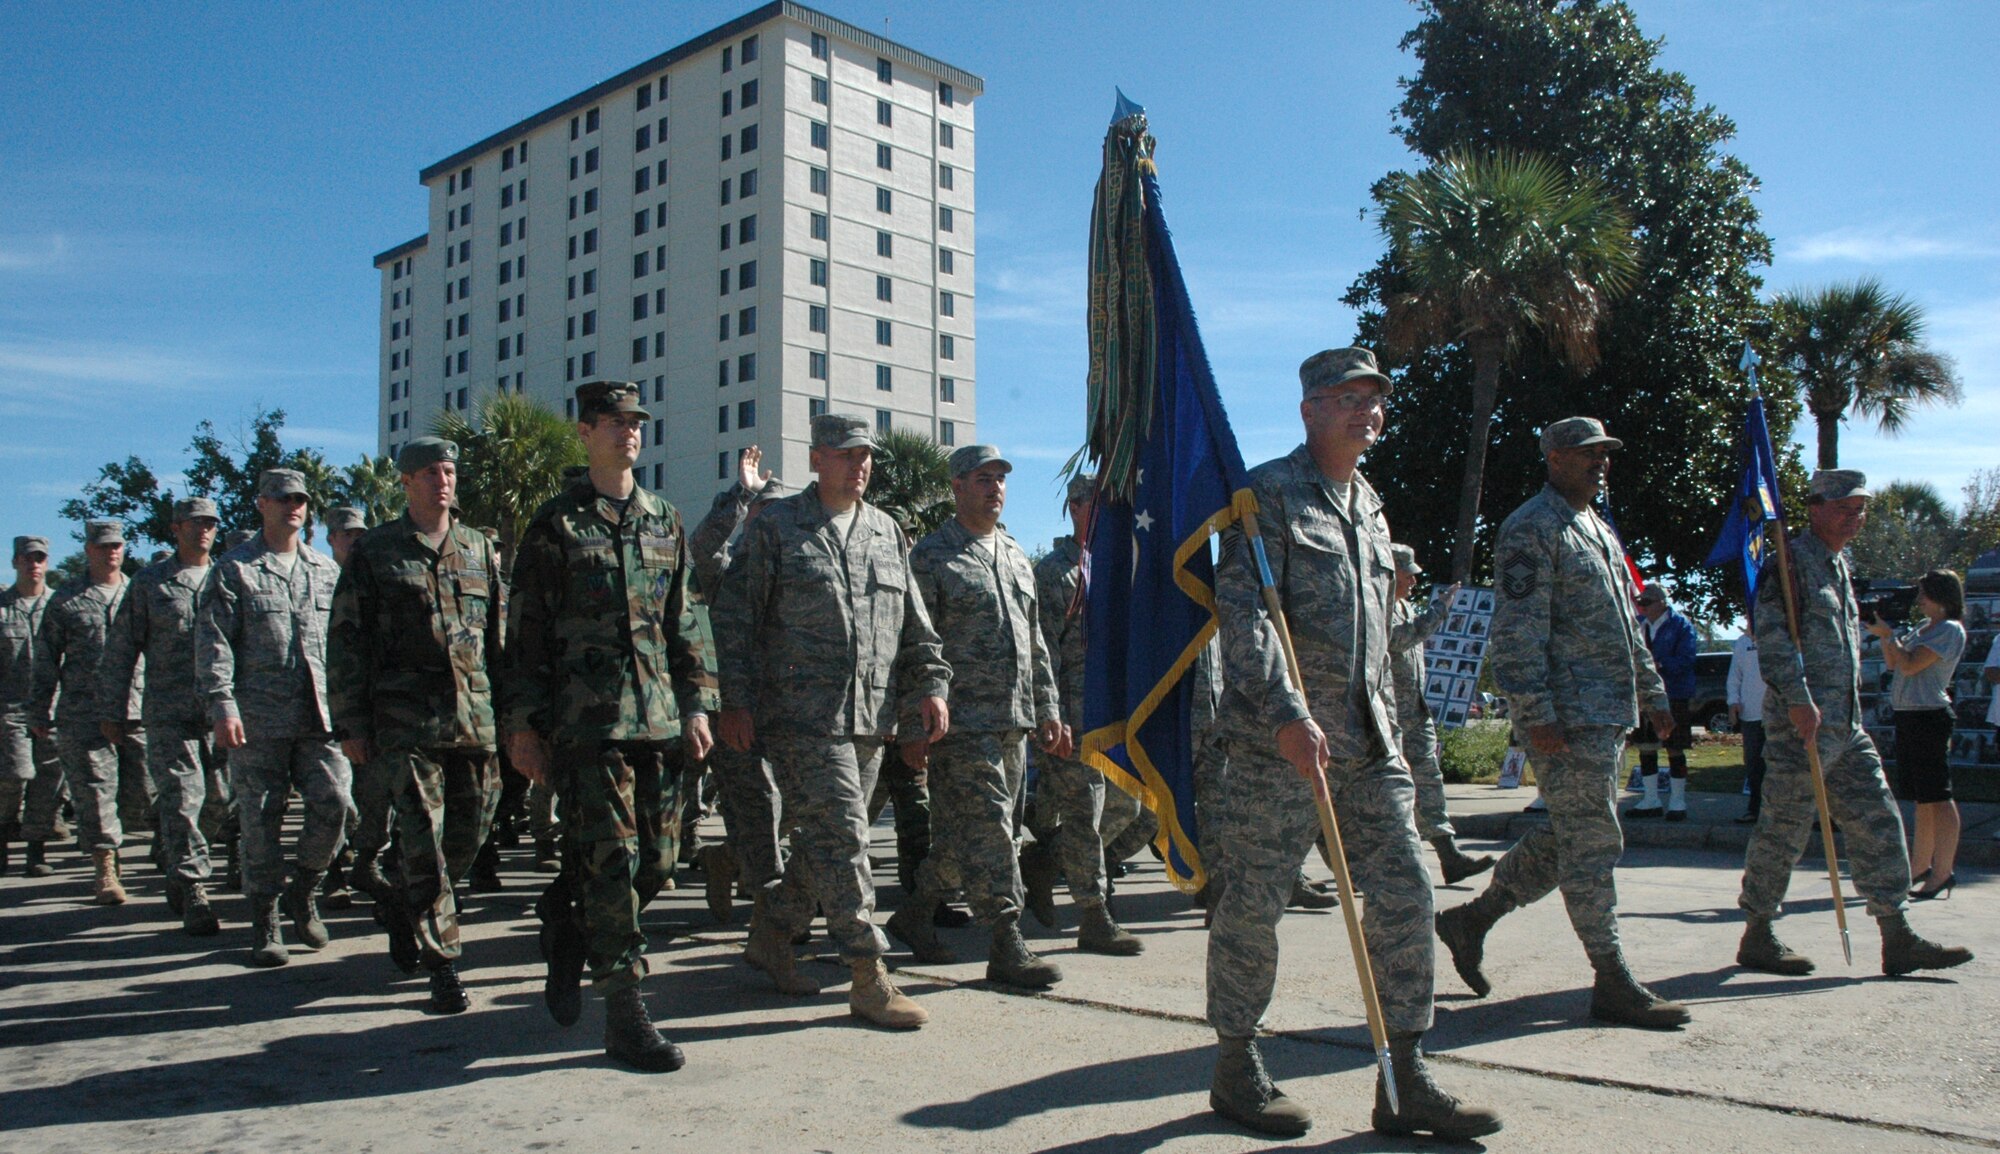 Chief Master Sgt. Benjamin Van Vleet, 325th Fighter Wing command chief master sergeant, leads a formation of more than 120 Airmen from Tyndall Air Force Base during the 2008 Veterans Day Parade in Panama City Tuesday.  The parade, an annual event for Panama City, was composed of elements from the local community, schools and military installations. (USAF photo by SSgt. Timothy Capling) 